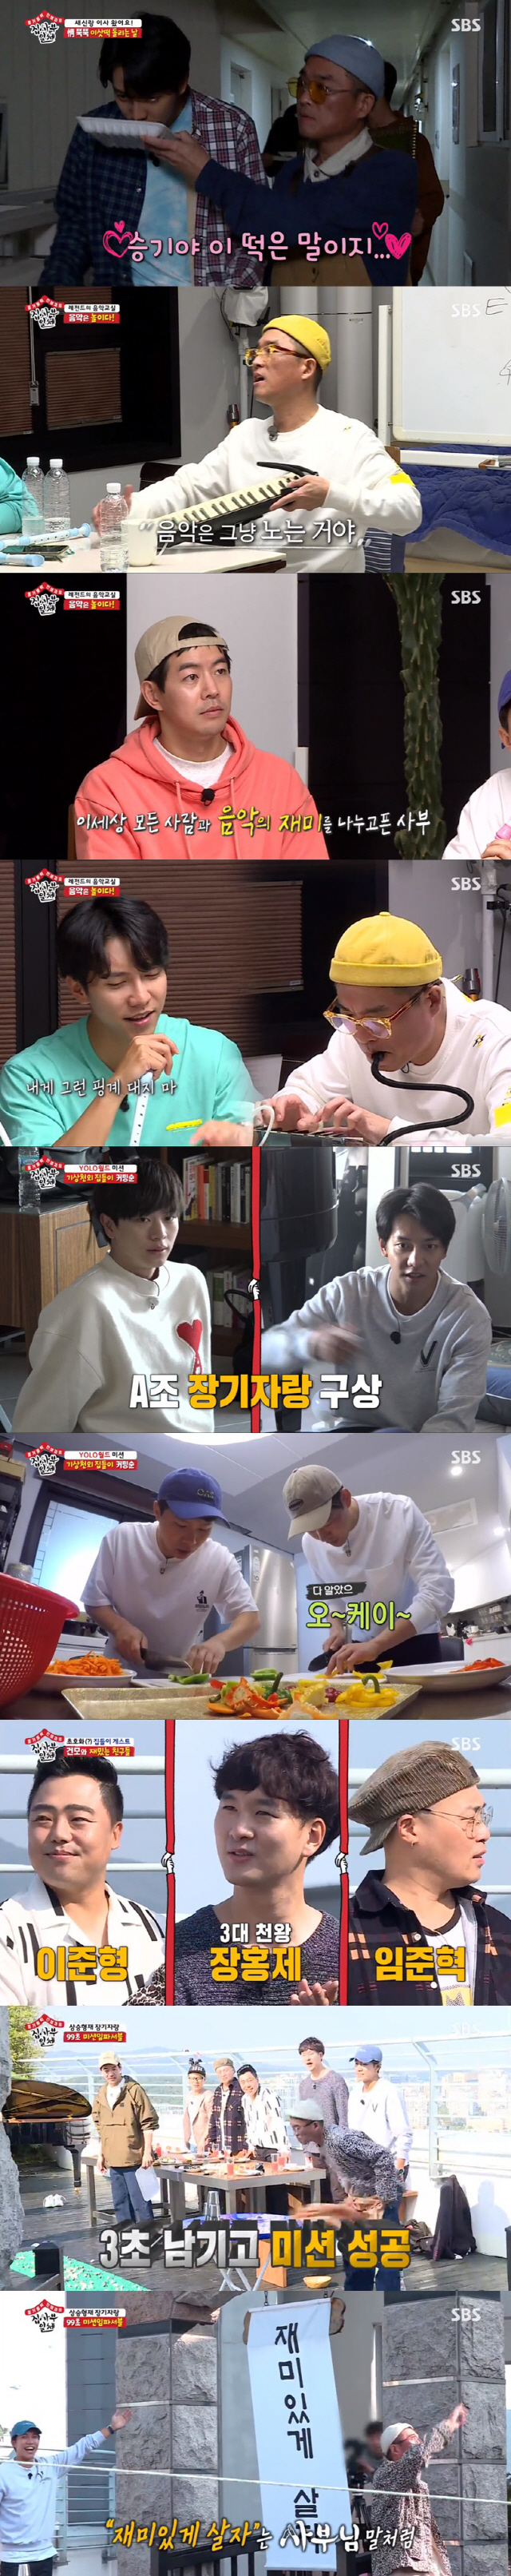 Kim Gun-mos impromptu Rooftops Live, which presented the serenade for Fiancé (?), recorded the highest TV viewer ratings of 10.7%.On this day, Kim Gun-mo, who moved to a new house, was shown to move around and prepare for the house.Lee Seung-gi turned the rice cake to his neighbors and said, I would like to ask my master well. The neighbors warmly welcomed Kim Gun-mo, saying, Welcome.Especially, it was known that Jang Ji-yeon, a preliminary bride, prepared the rice cake that was turned on this day.Kim Gun-mo then started a music theory class for the members, and Kim Gun-mo, who took out the melody, showed off a wonderful performance by telling the members how to breathe emotions.He said, Music is playing. He told the members, I want to deal with one instrument.The members started playing in line with the masters best hit song Excuse, and Lee Seung-gi, who played the vocals, completed the ensemble with perfect sound of the high range.Kim Gun-mo, who was singing Im sorry at the end of the song, opened Giantis Yanghwa Bridge and said, Lets be happy, lets be happy.Lets think about your age. Dont eat. Lets just eat it. I love you. He whispered love to the new bride in a unique Kim Gun-mo style.The scene shot up to 10.7% of the highest TV viewer ratings per minute, taking the best minute.